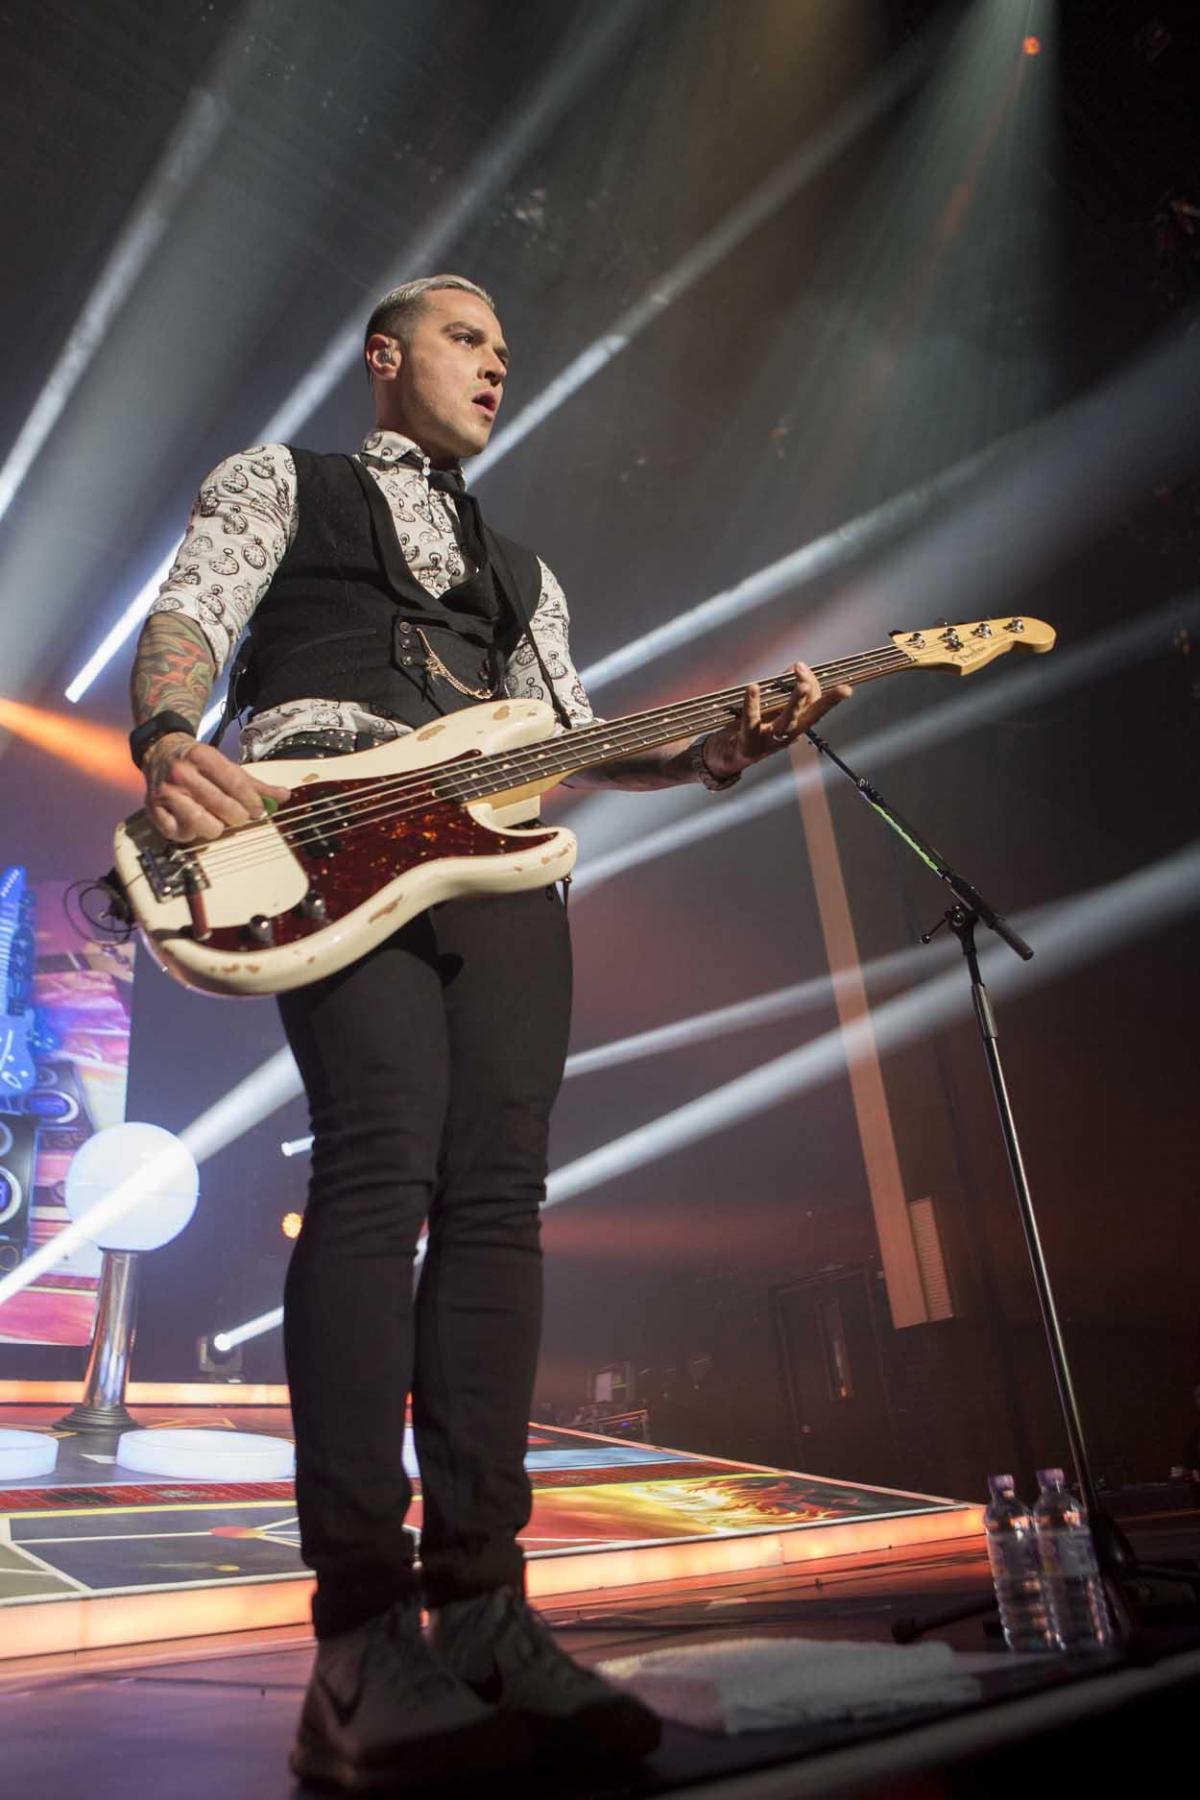 McBusted at the BIC in Bournemouth. All pics by rockstarimages.co.uk